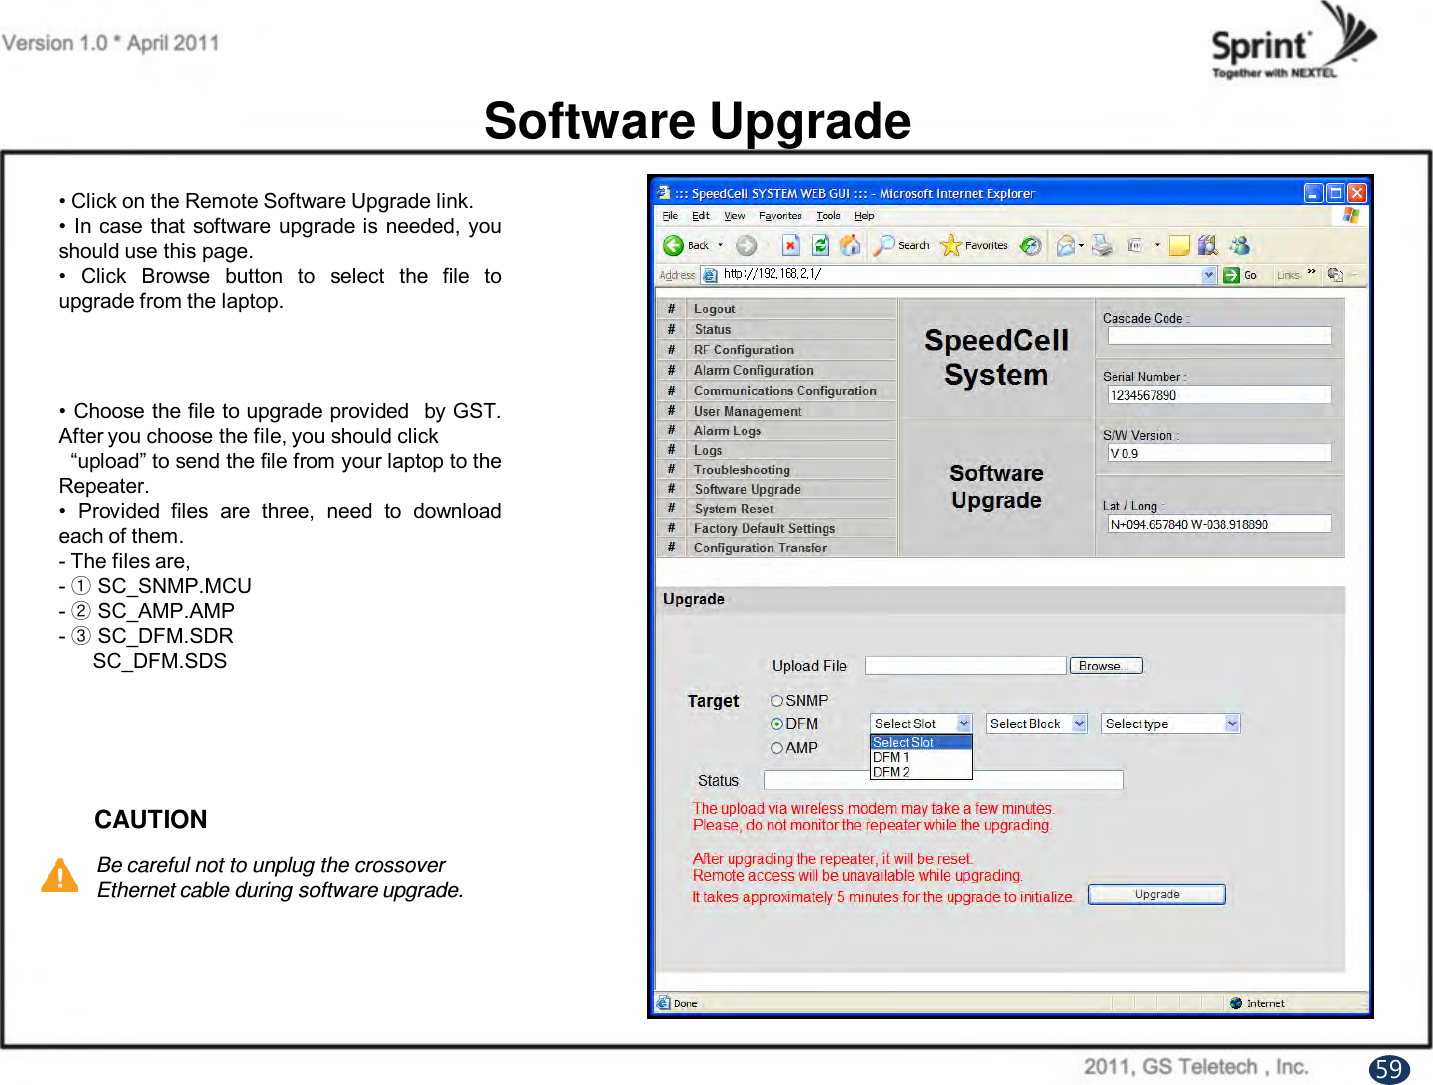 Software Upgrade• Click on the Remote Software Upgrade link.•In case that software upgrade is needed, youshould use this page.• Click Browse button to select the file toupgrade from the laptop.• Choose the file to upgrade provided by GST.After you choose the file, you should click“upload” to send the file from your laptop to theRepeater.• Provided files are three, need to downloadeach of them.- The files are,-ྙSC_SNMP.MCU-ྚSC_AMP.AMP-ྛSC_DFM.SDRSC_DFM.SDSCAUTIONBe careful not to unplug the crossover Ethernet cable during software upgrade.59